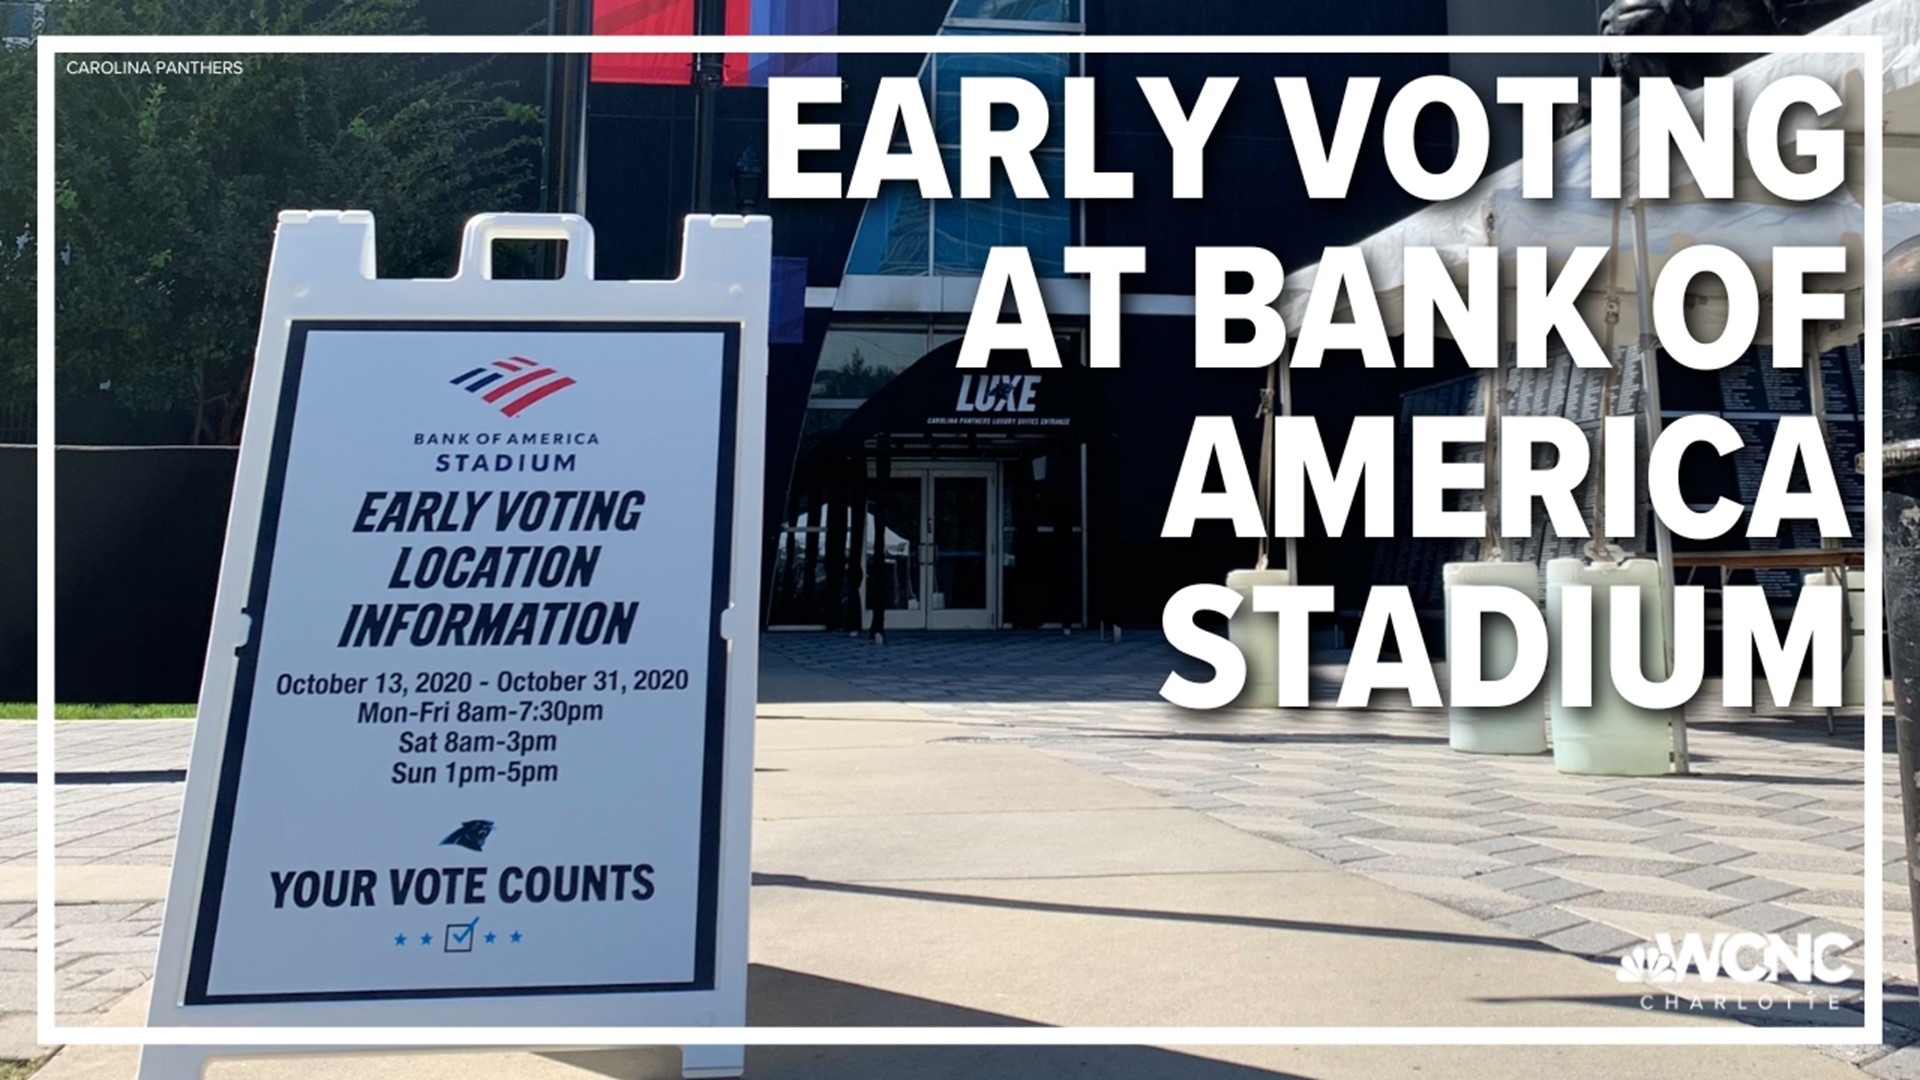 The Mecklenburg County Board of Elections has approved Bank of America Stadium as an early voting site this fall.